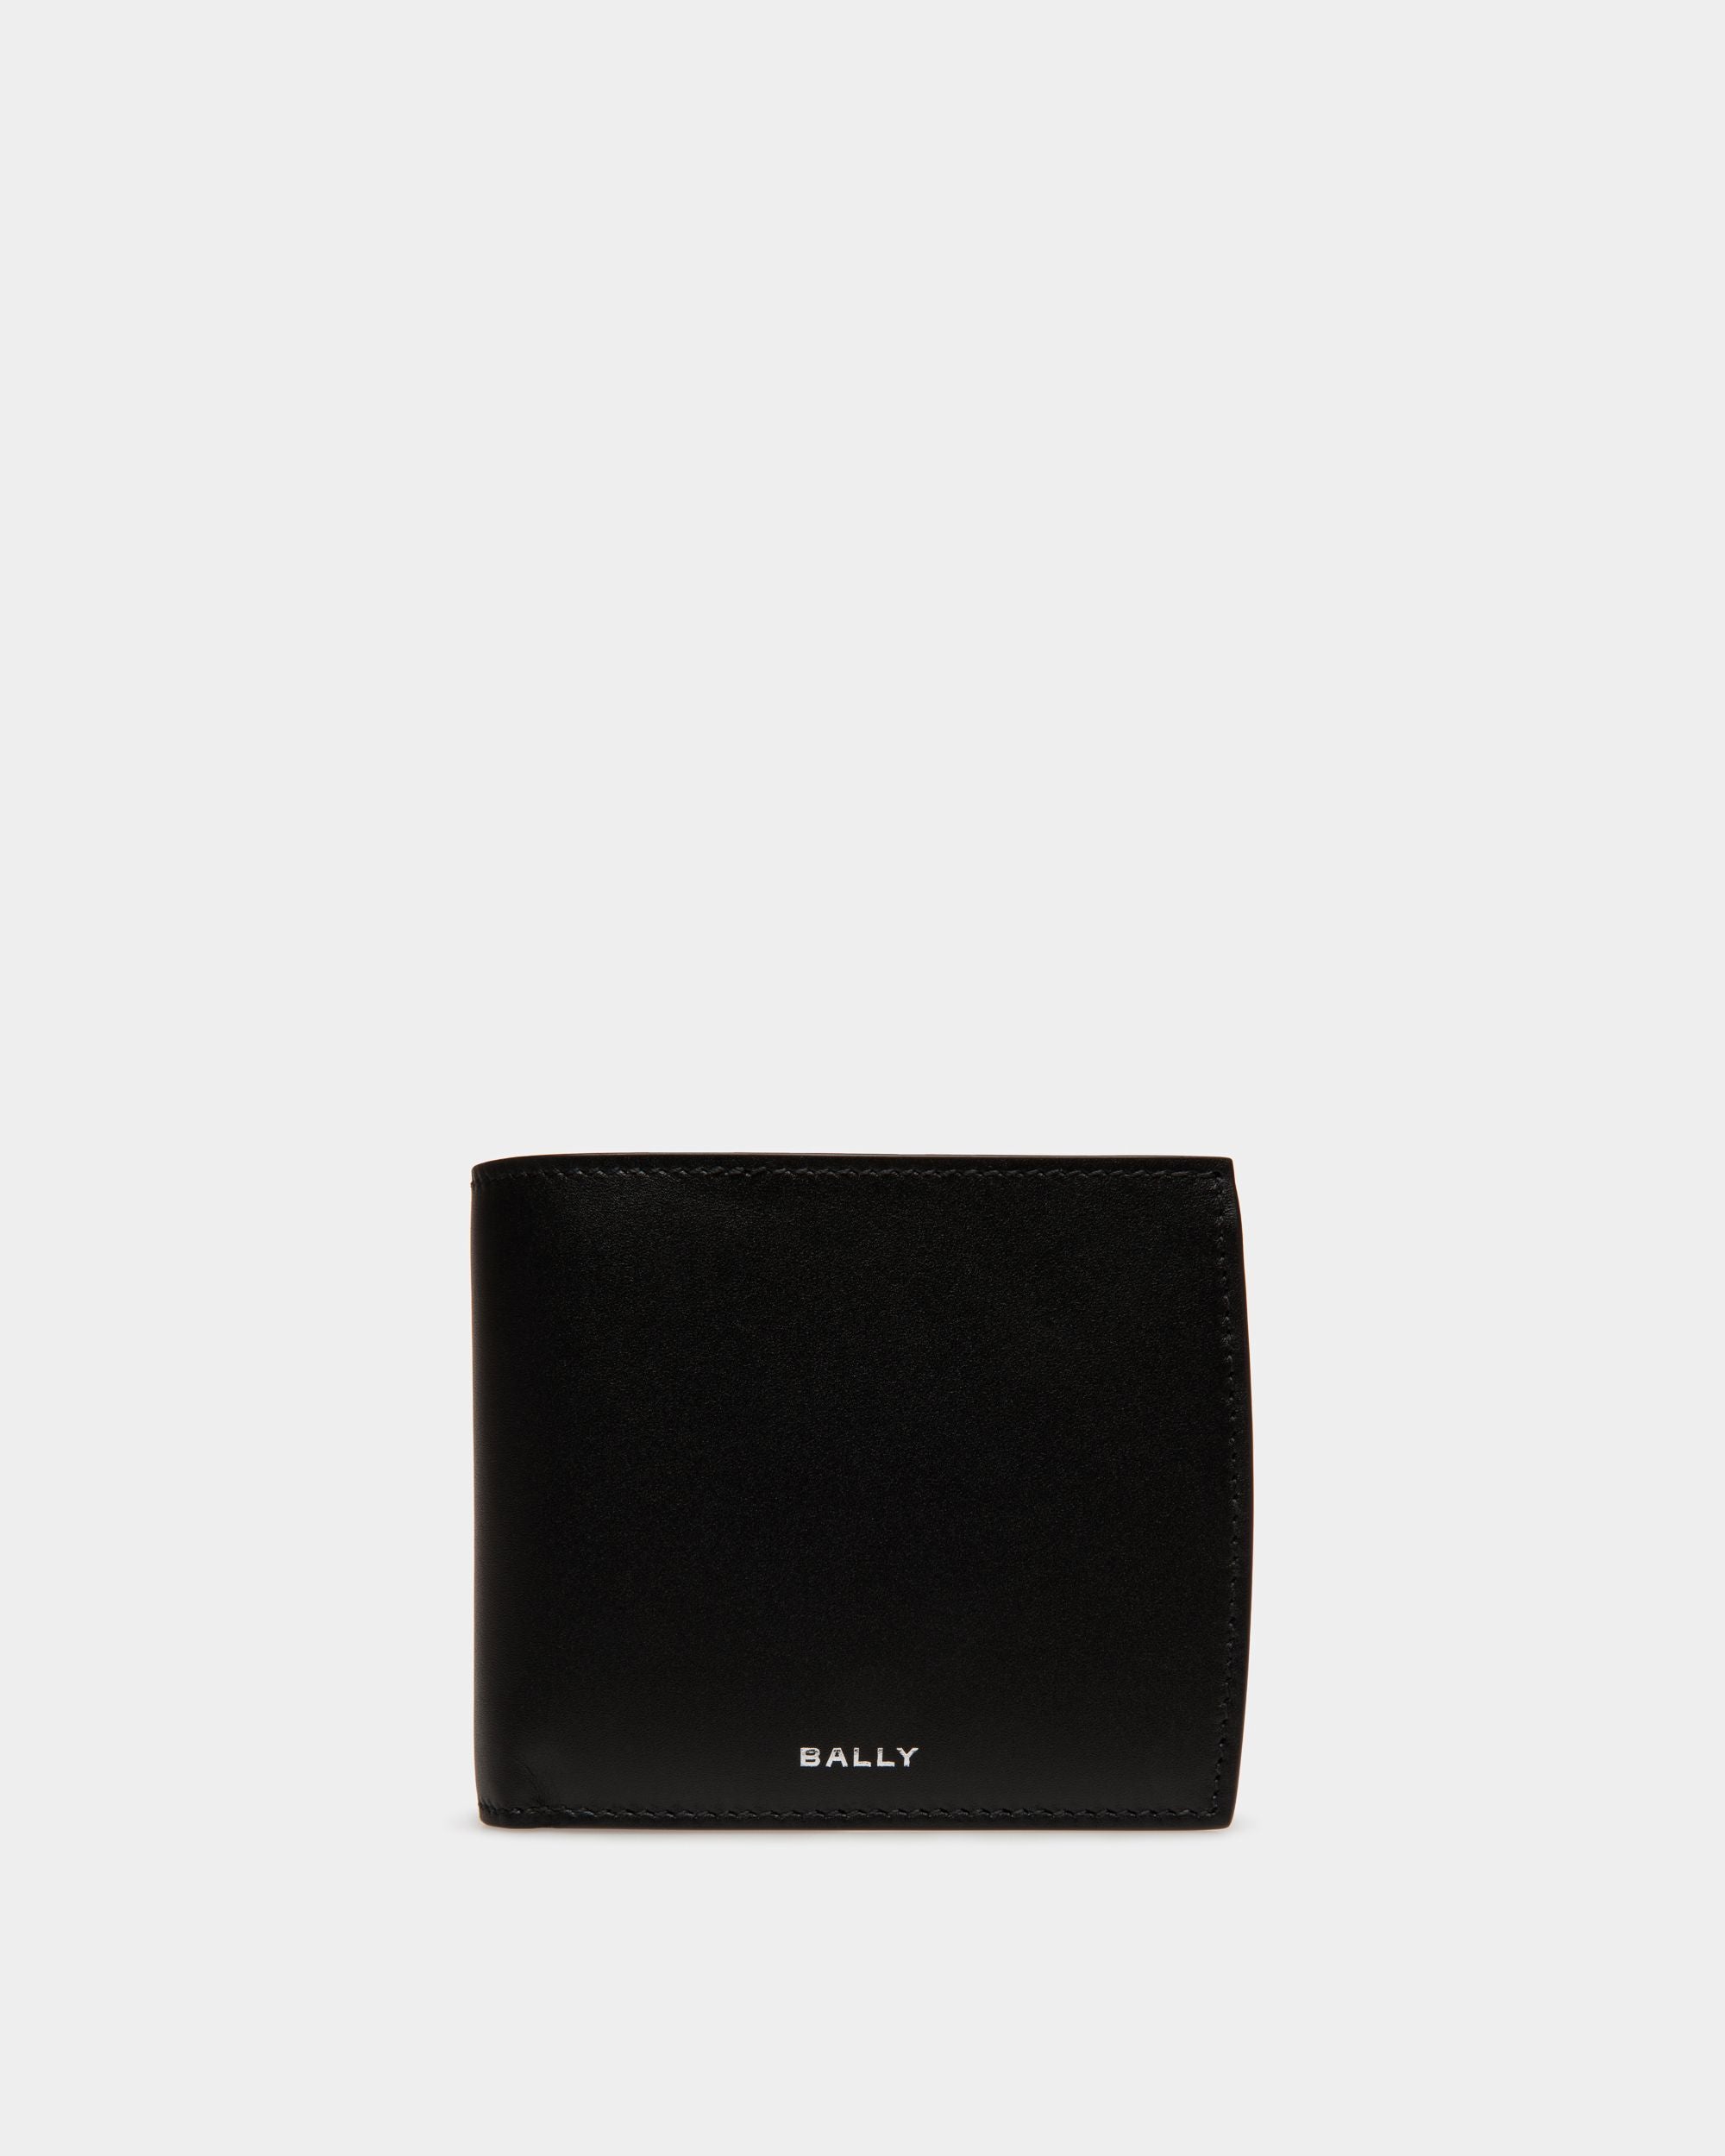 Busy Bally | Men's Bifold Wallet in Black Leather | Bally | Still Life Front